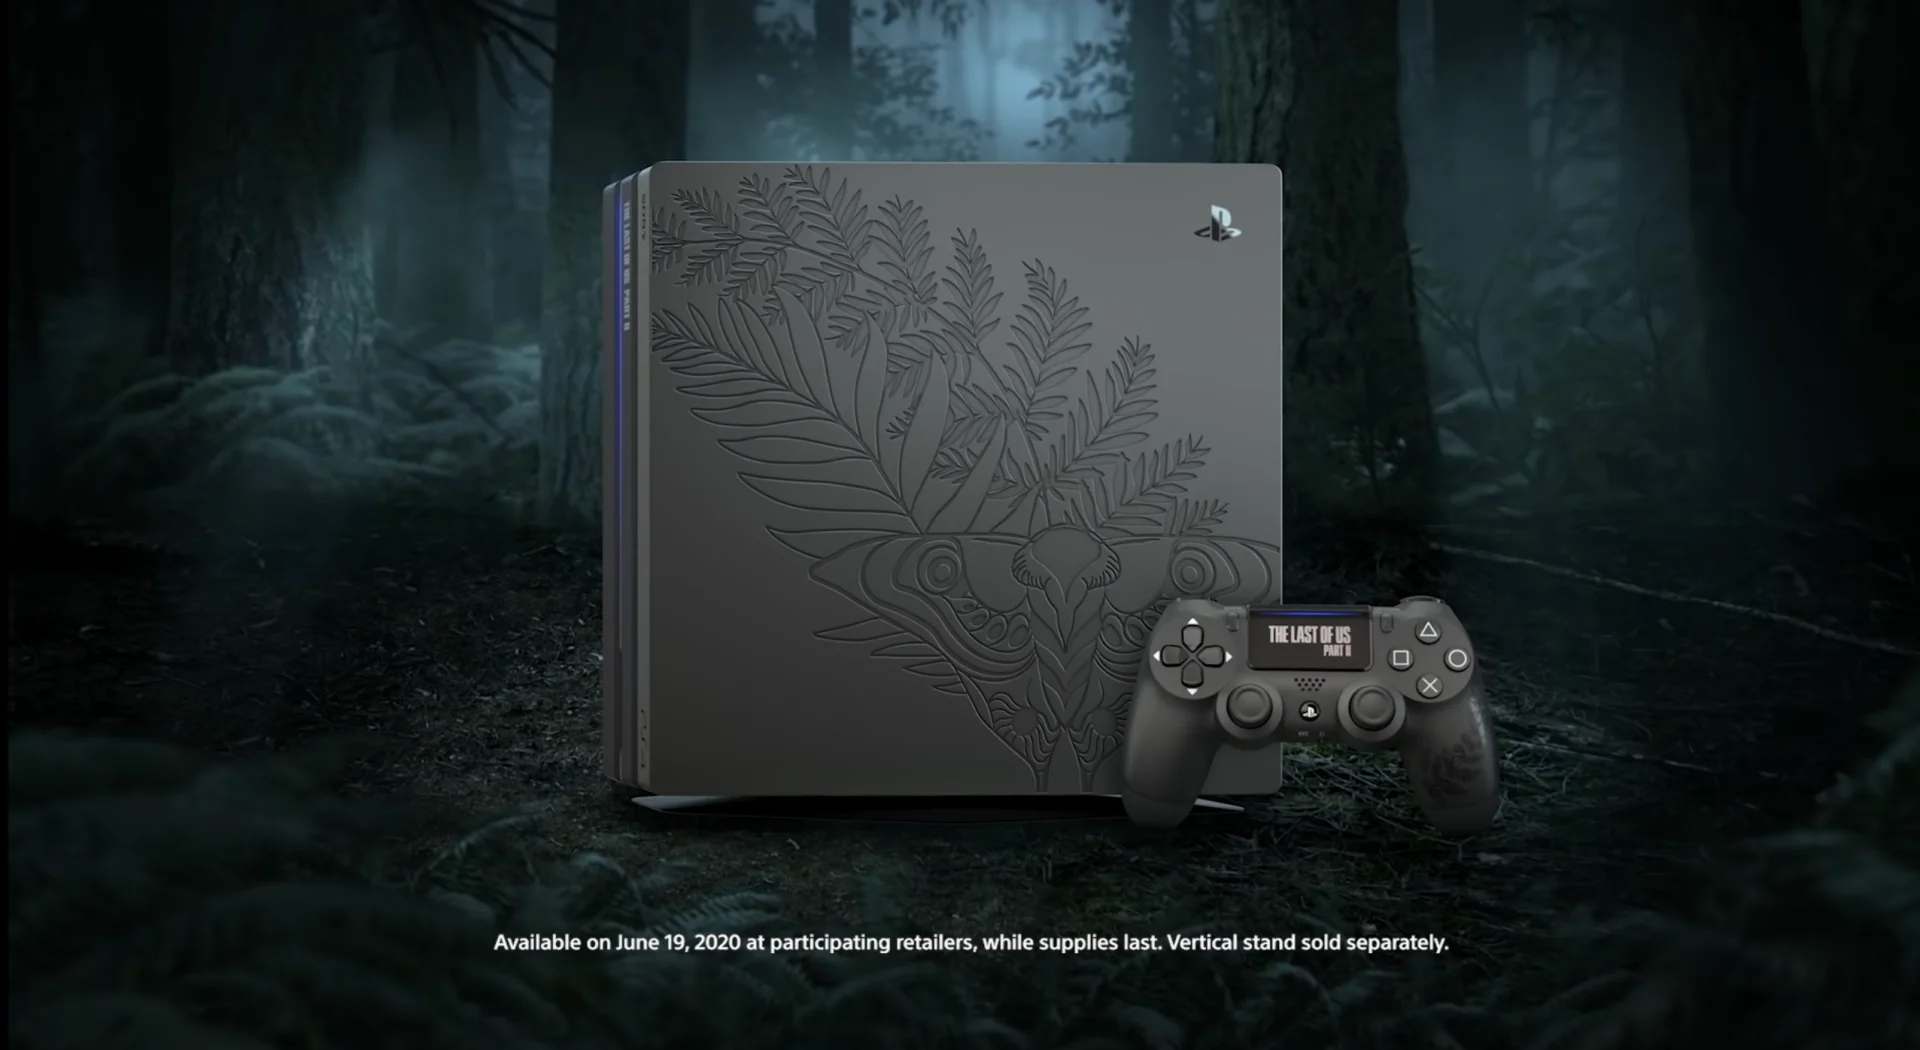 The Last of Us 2 PS4 pro announced!